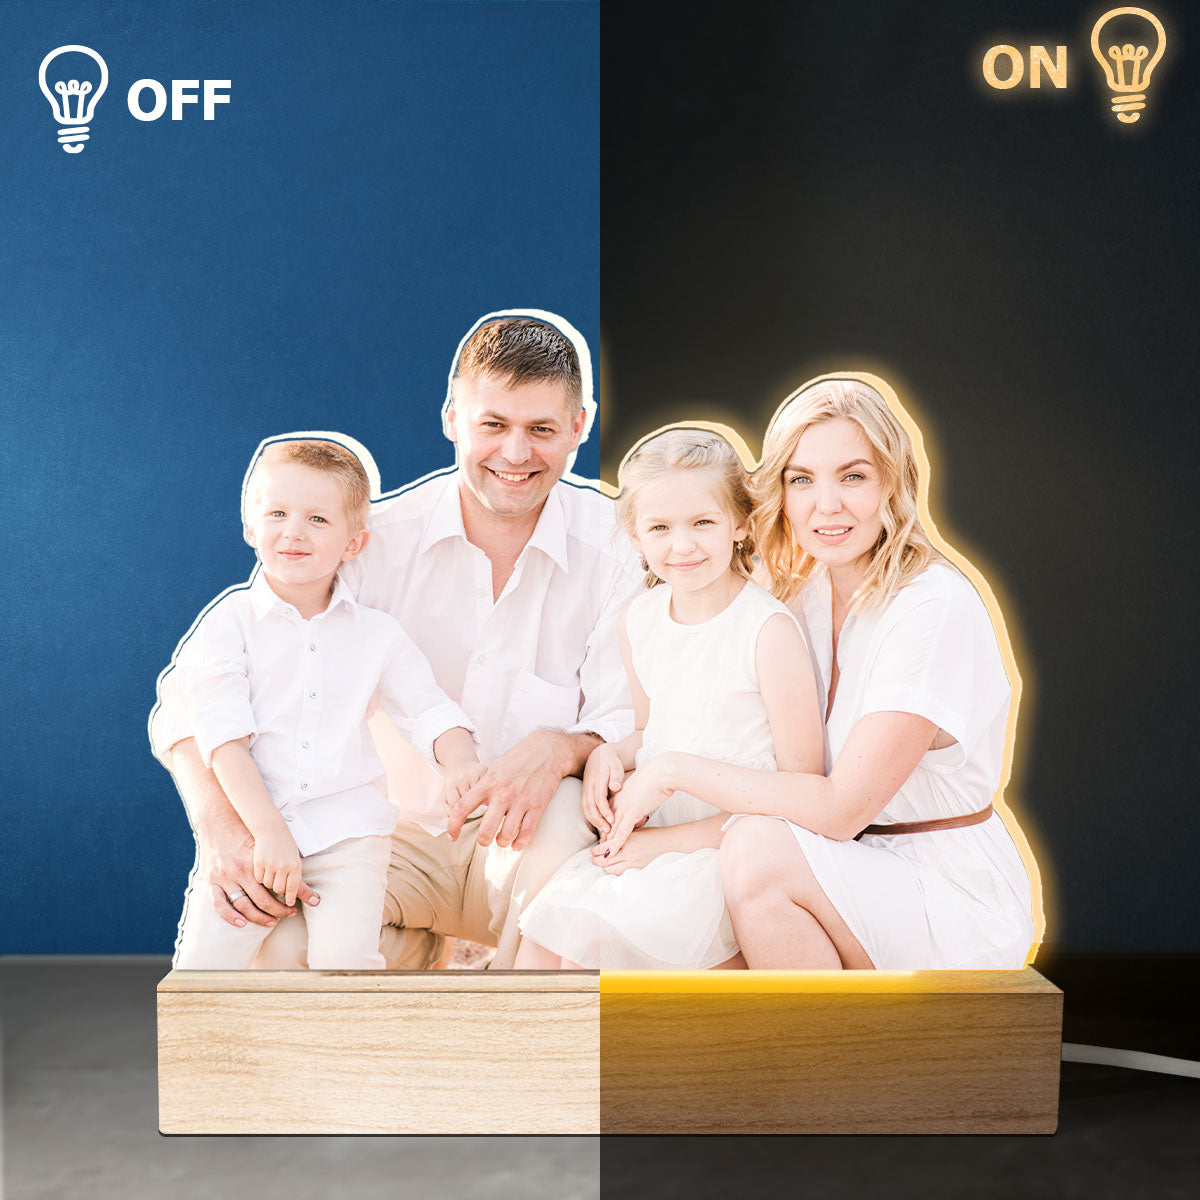 Custom Photo The Source Of My Greatest Joy - Family Personalized Custom Shaped 3D LED Light - Upload Photo Gift For Family Members